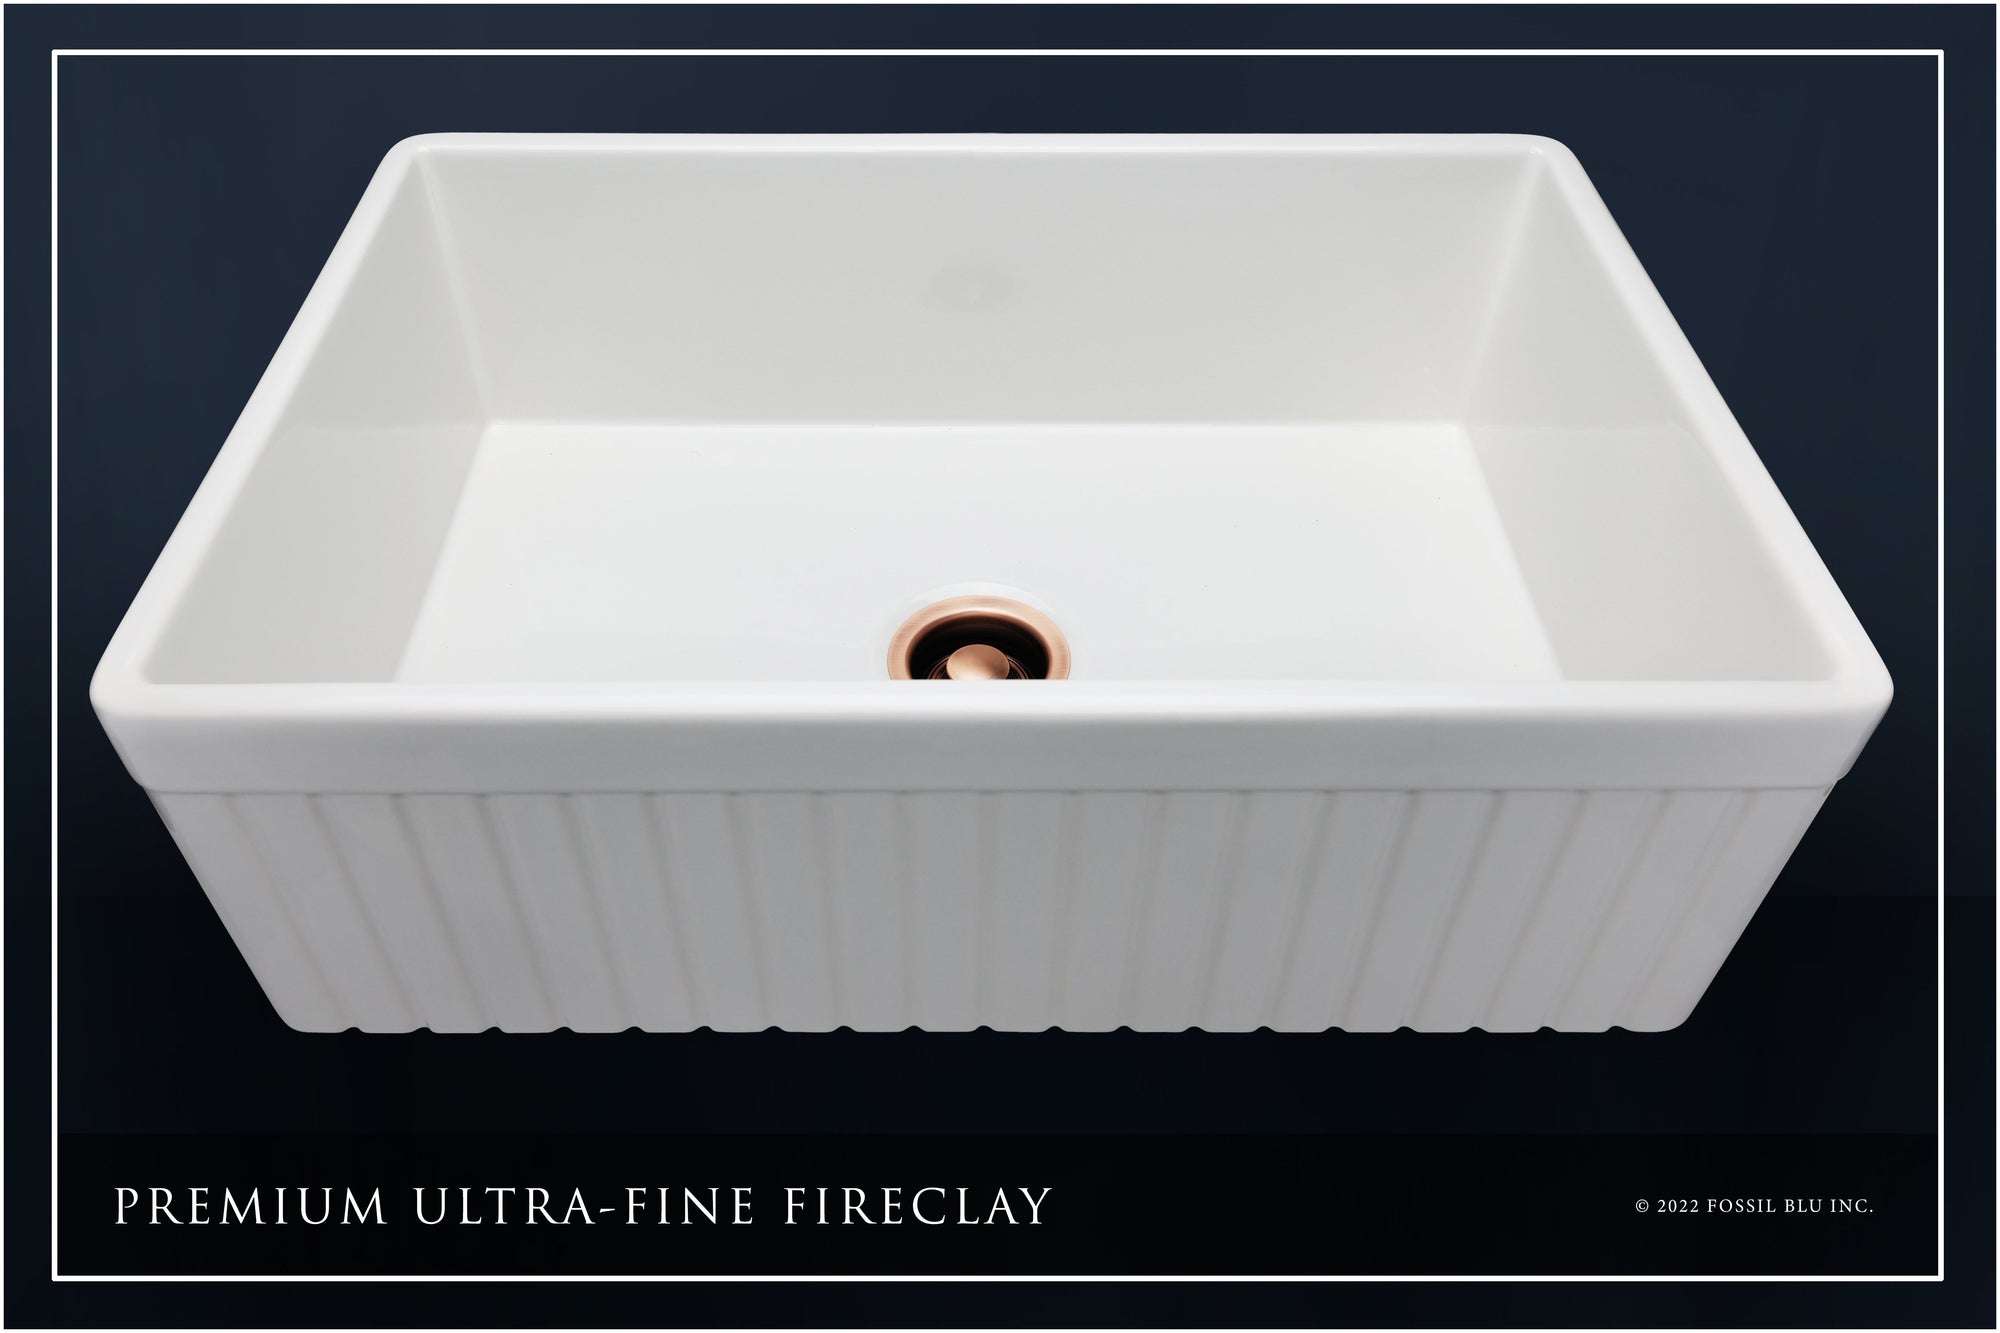 FSW1007AC LUXURY 33-INCH SOLID FIRECLAY FARMHOUSE SINK IN WHITE, ANTIQUE COPPER ACCS, FLUTED FRONT